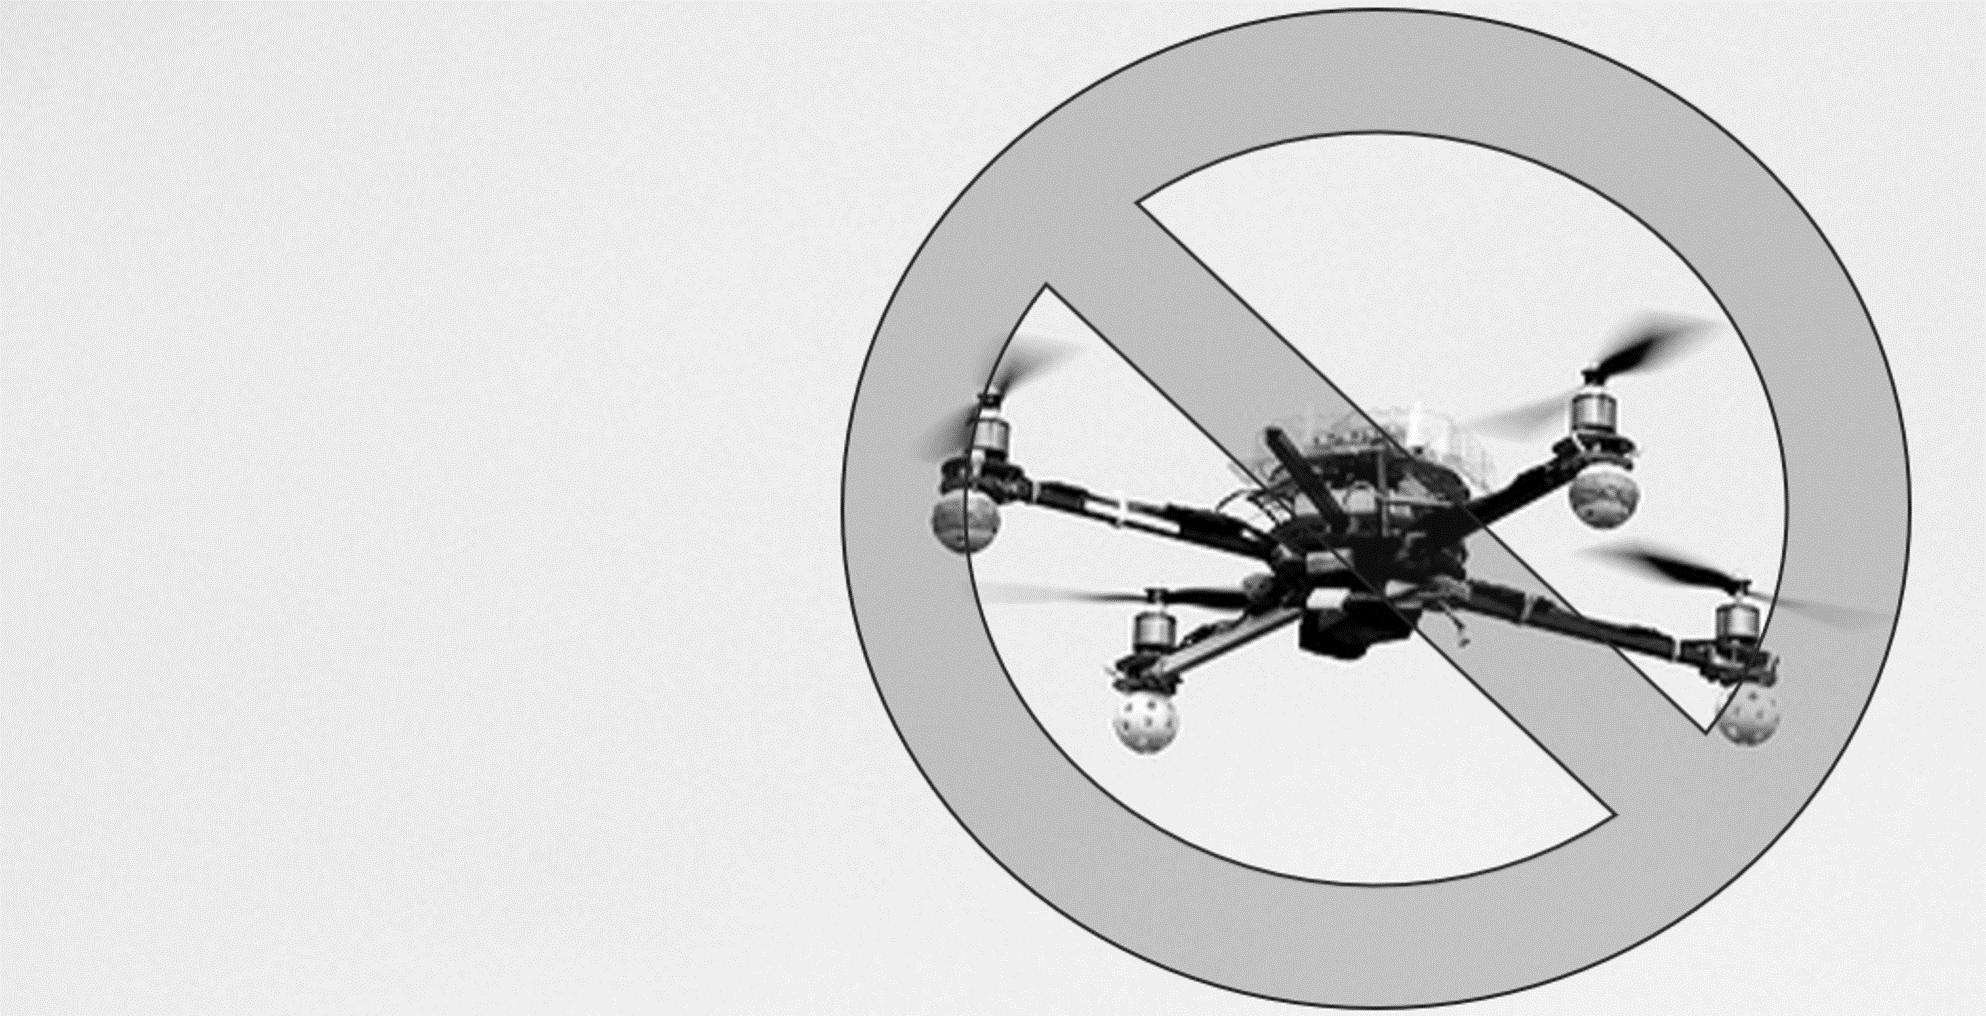 Drone-with-no-entry-sign_BW.png